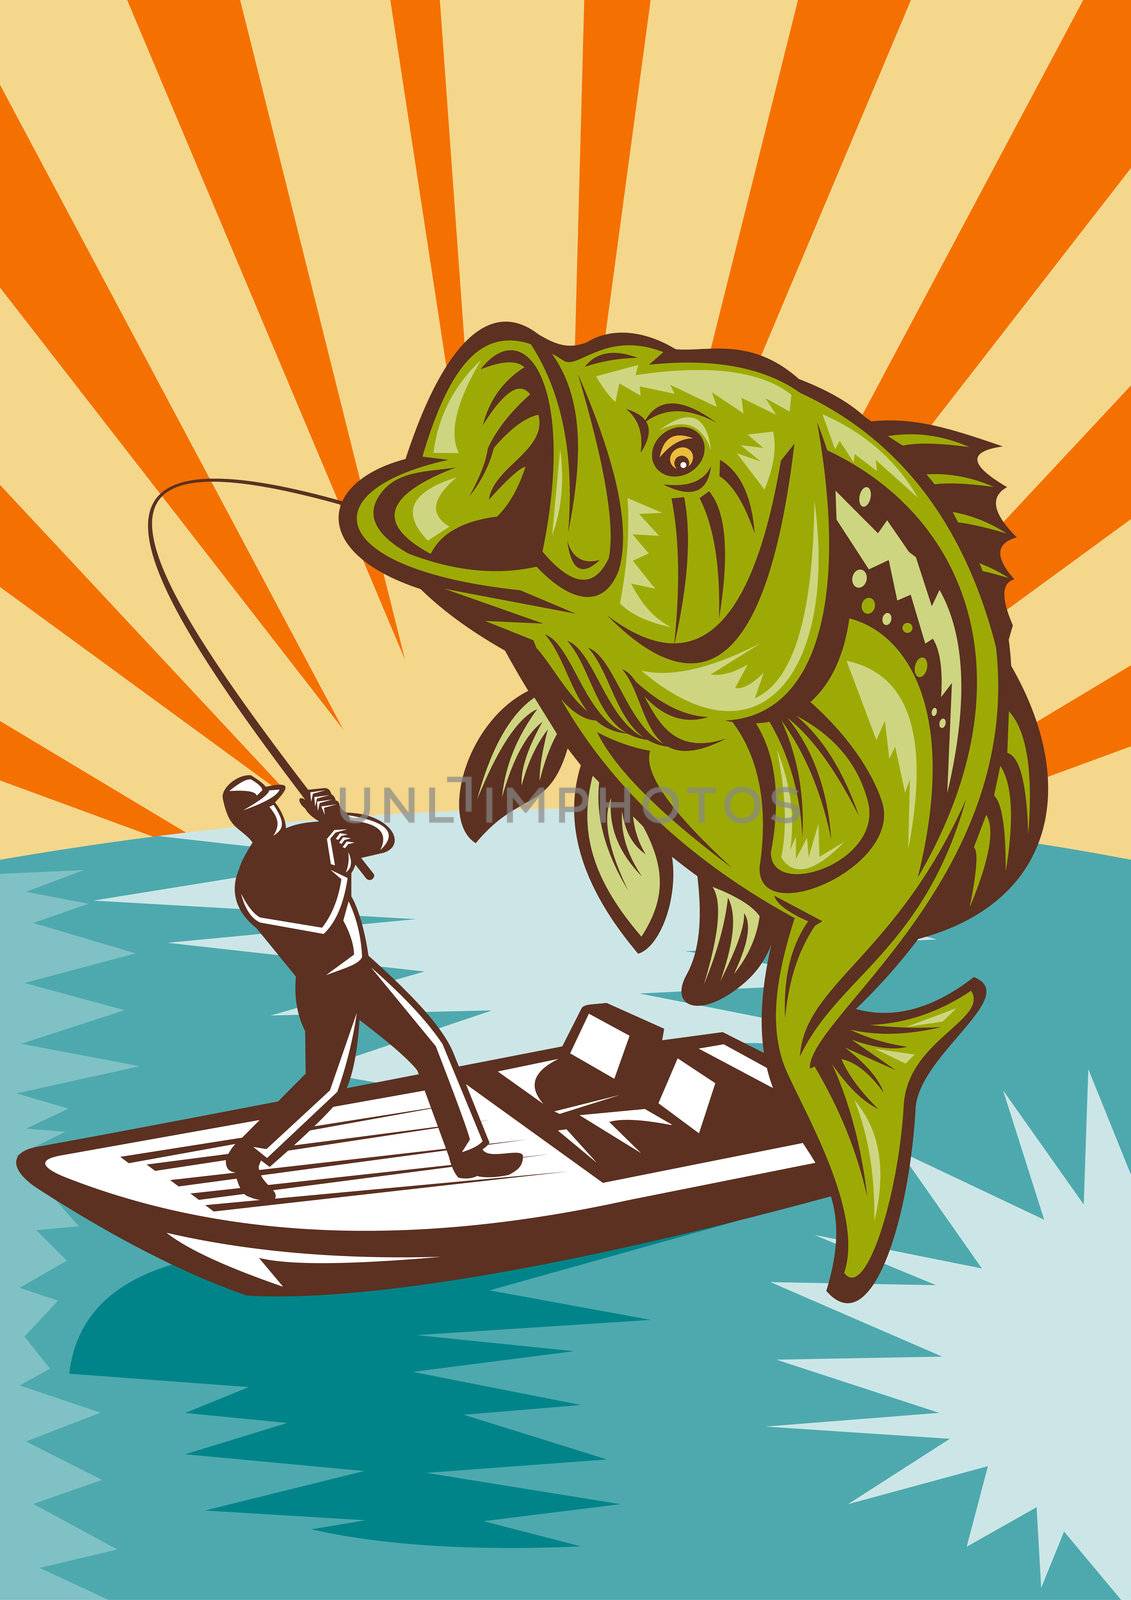 illustration of a Largemouth Bass Fish jumping being reeled by Fly Fisherman on bass boat with Fishing rod 
done in retro styl